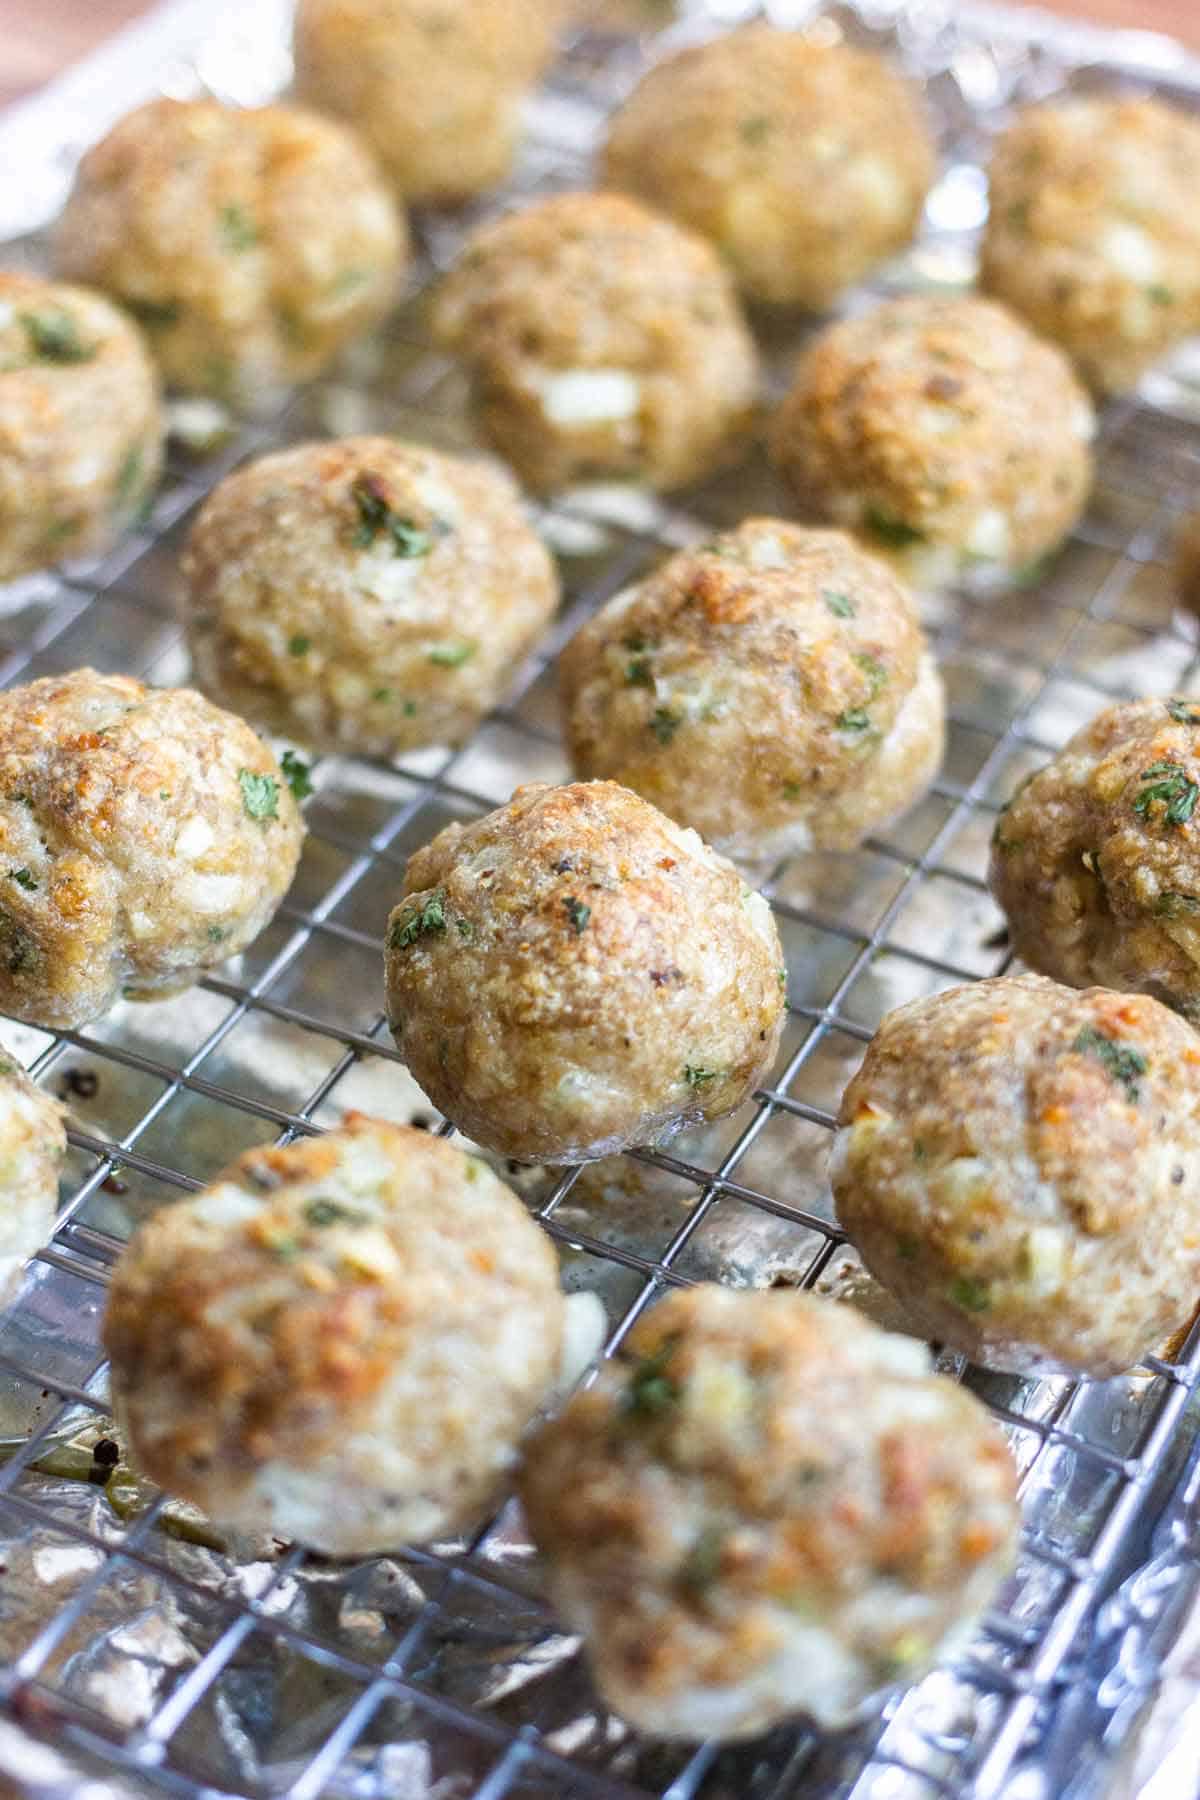 Baked turkey meatballs on a wire rack on a baking tray that is covered in foil.